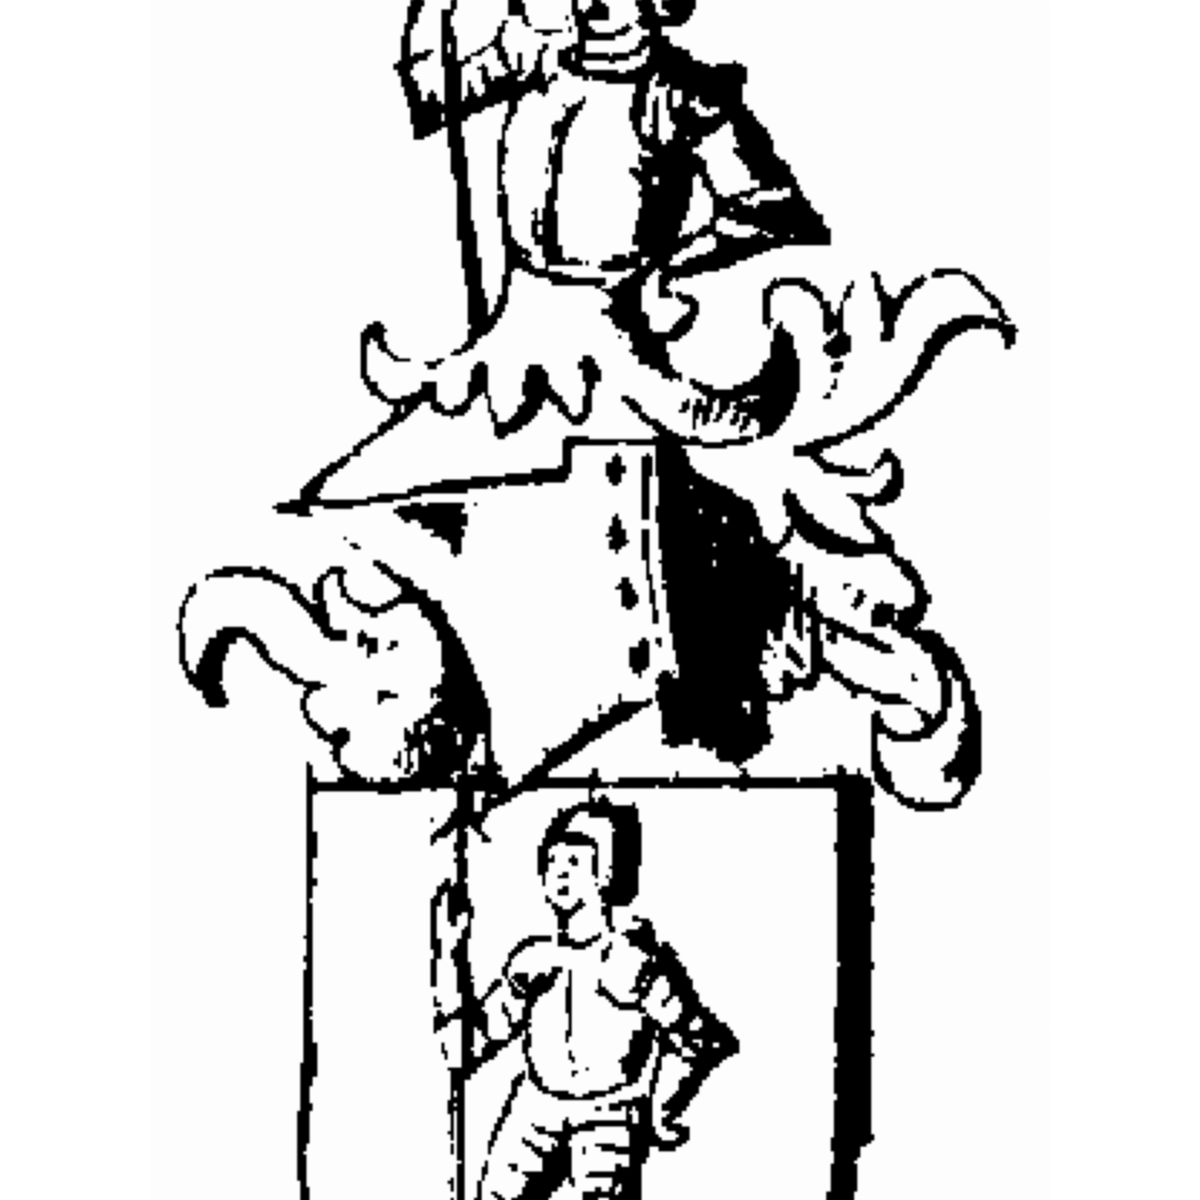 Coat of arms of family Torner